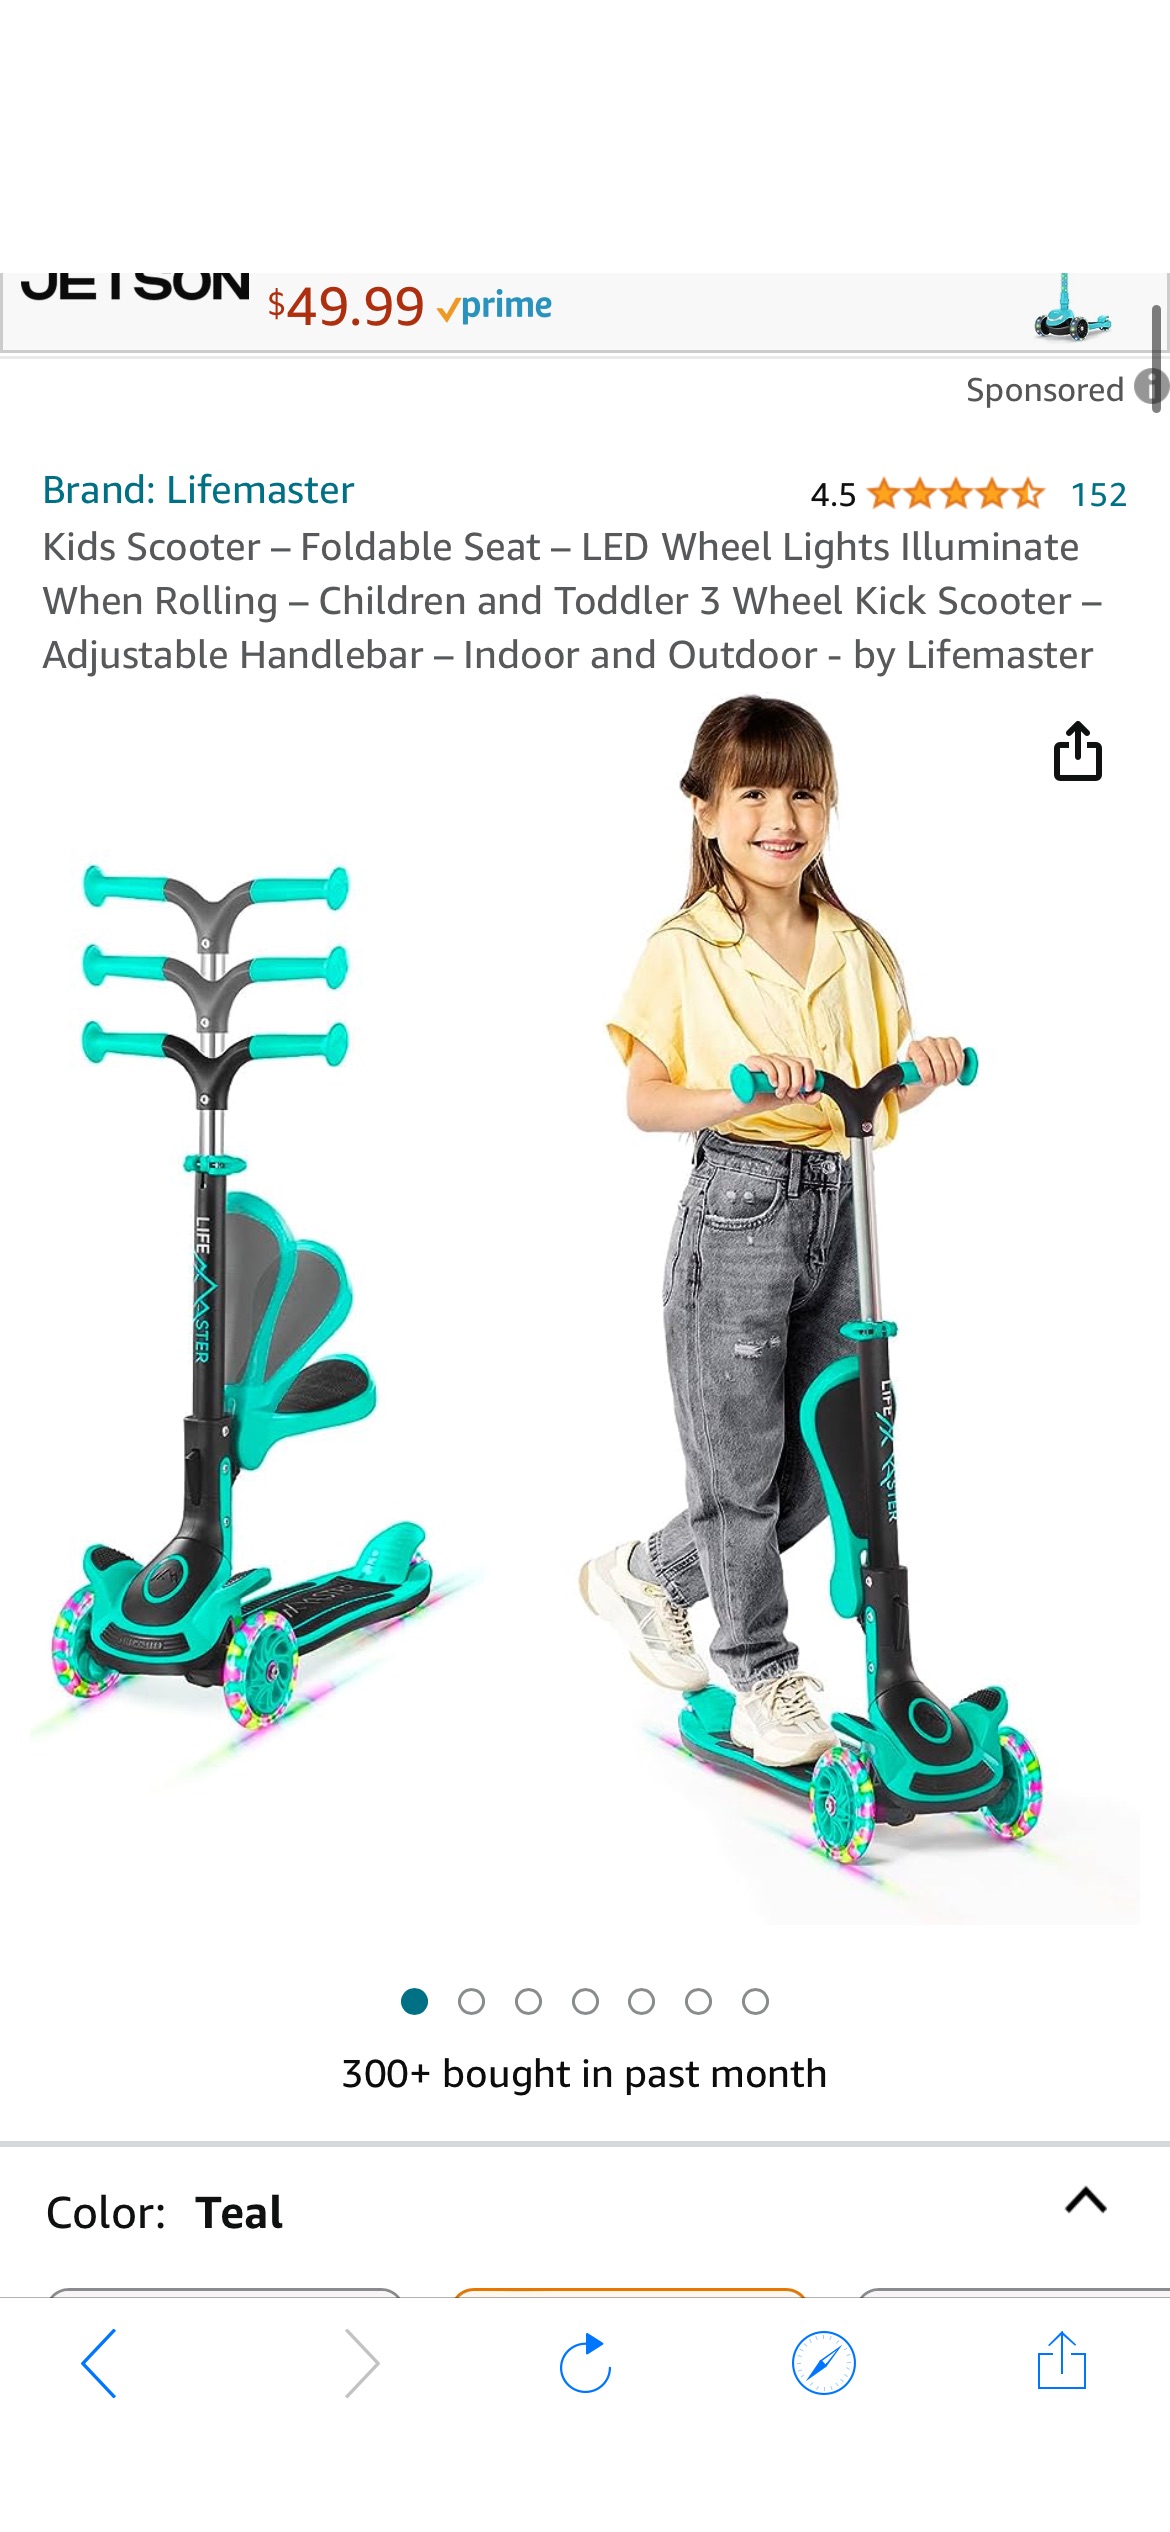 Amazon.com : Kids Scooter – Foldable Seat – LED Wheel Lights Illuminate When Rolling – Children and Toddler 3 Wheel Kick Scooter – Adjustable Handlebar – Indoor and Outdoor- Teal - by Lifemaster : Spo